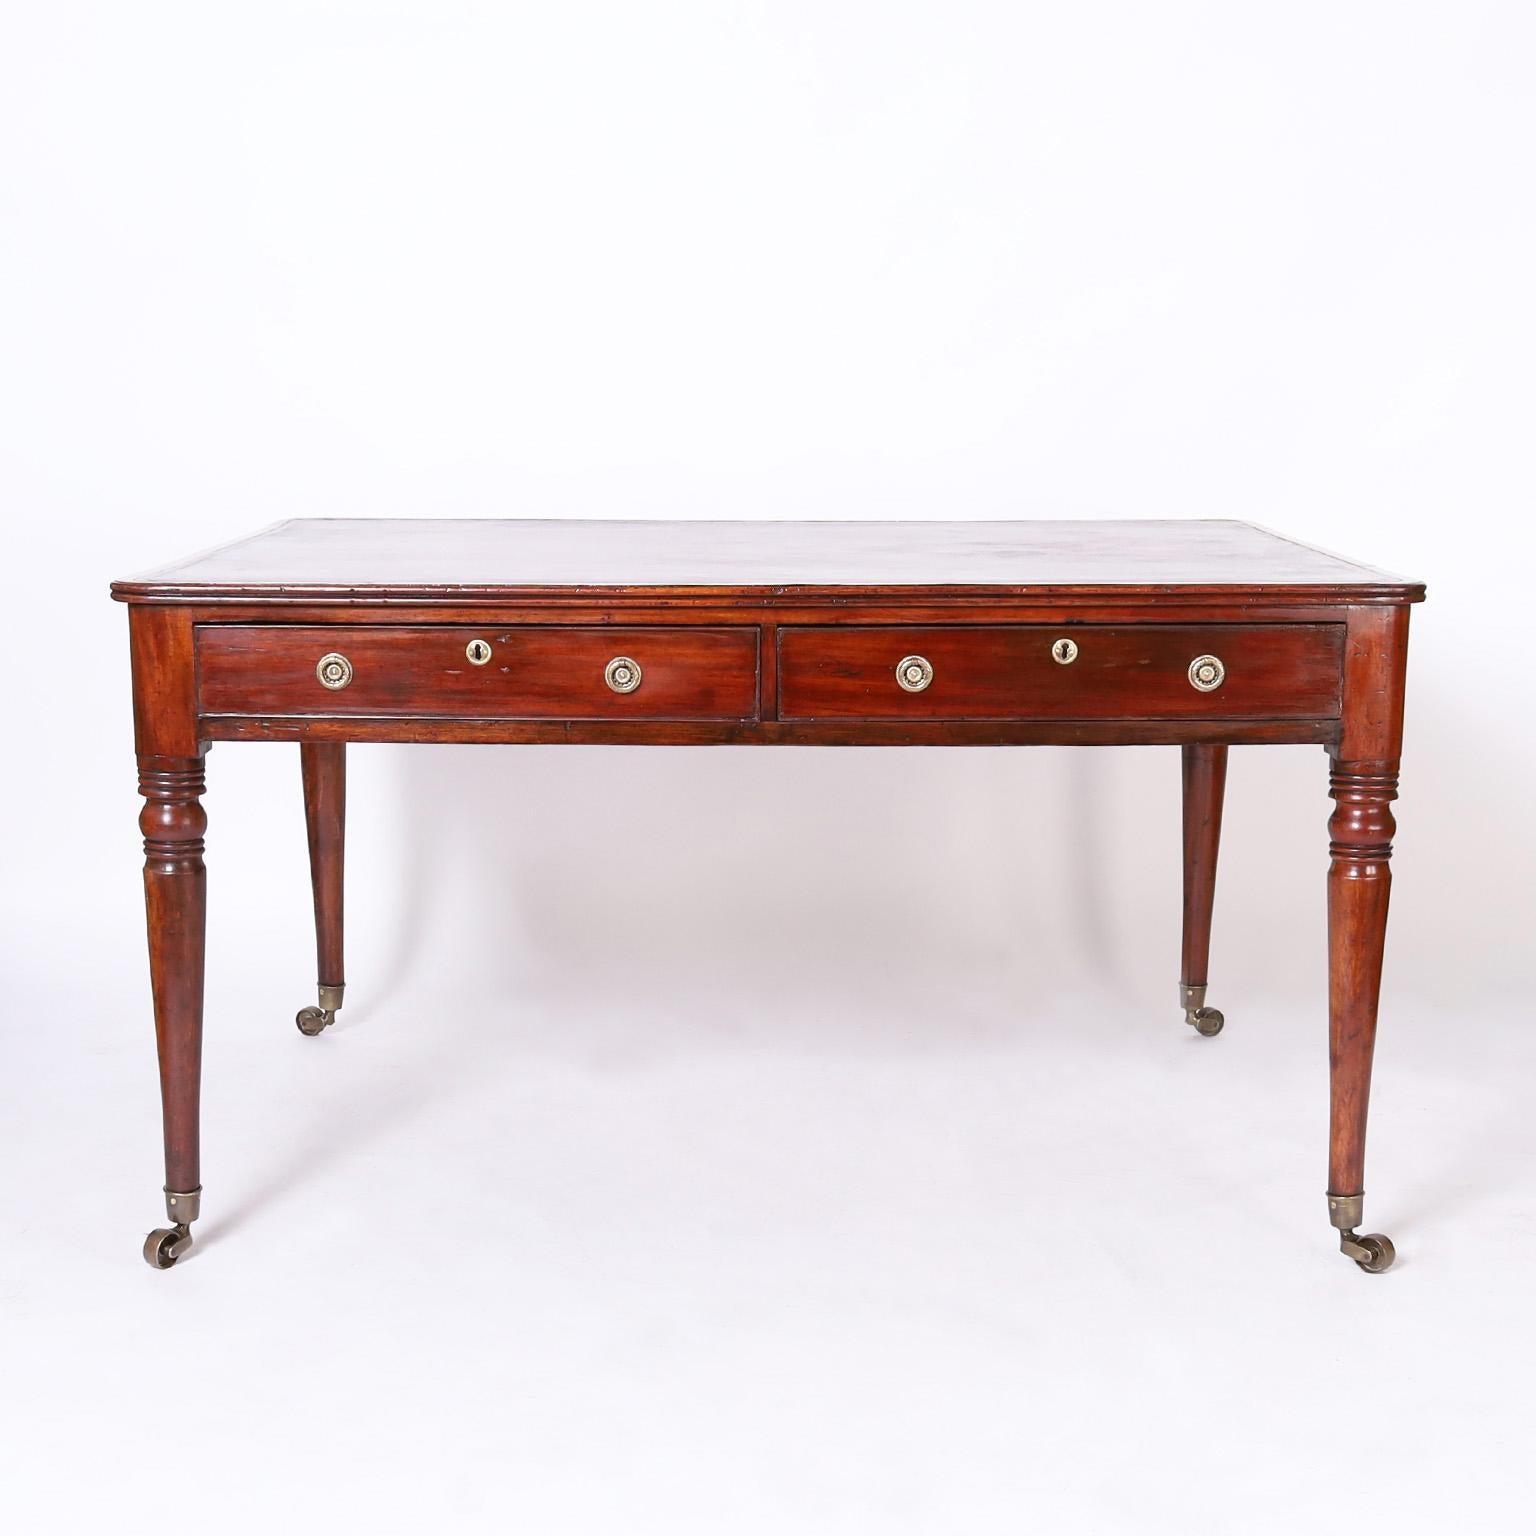 Handsome British Colonial partners desk hand crafted in mahogany with a brown tooled leather top, two drawers on either side and elegant turned legs on brass casters.